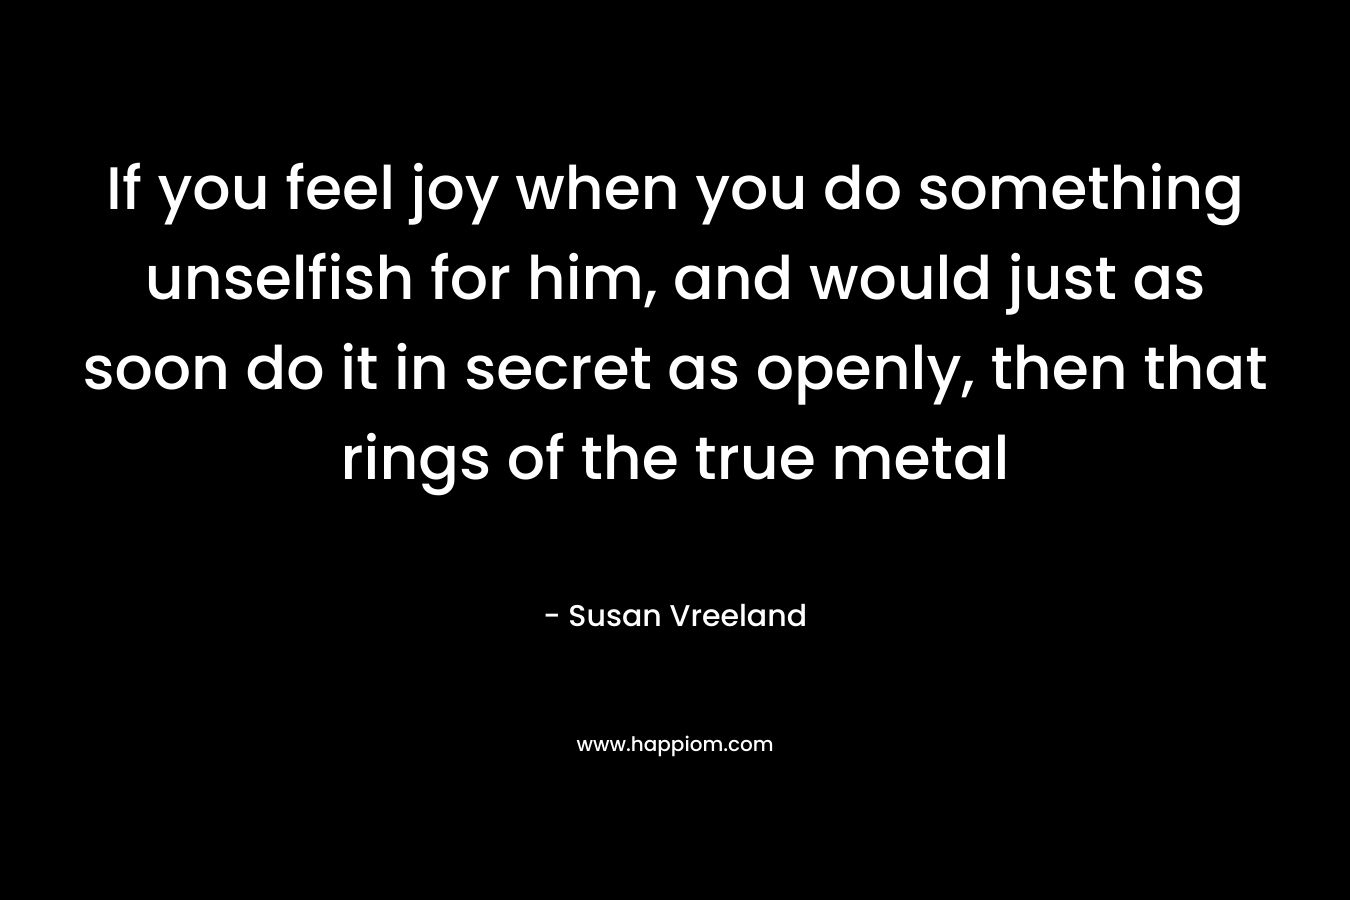 If you feel joy when you do something unselfish for him, and would just as soon do it in secret as openly, then that rings of the true metal